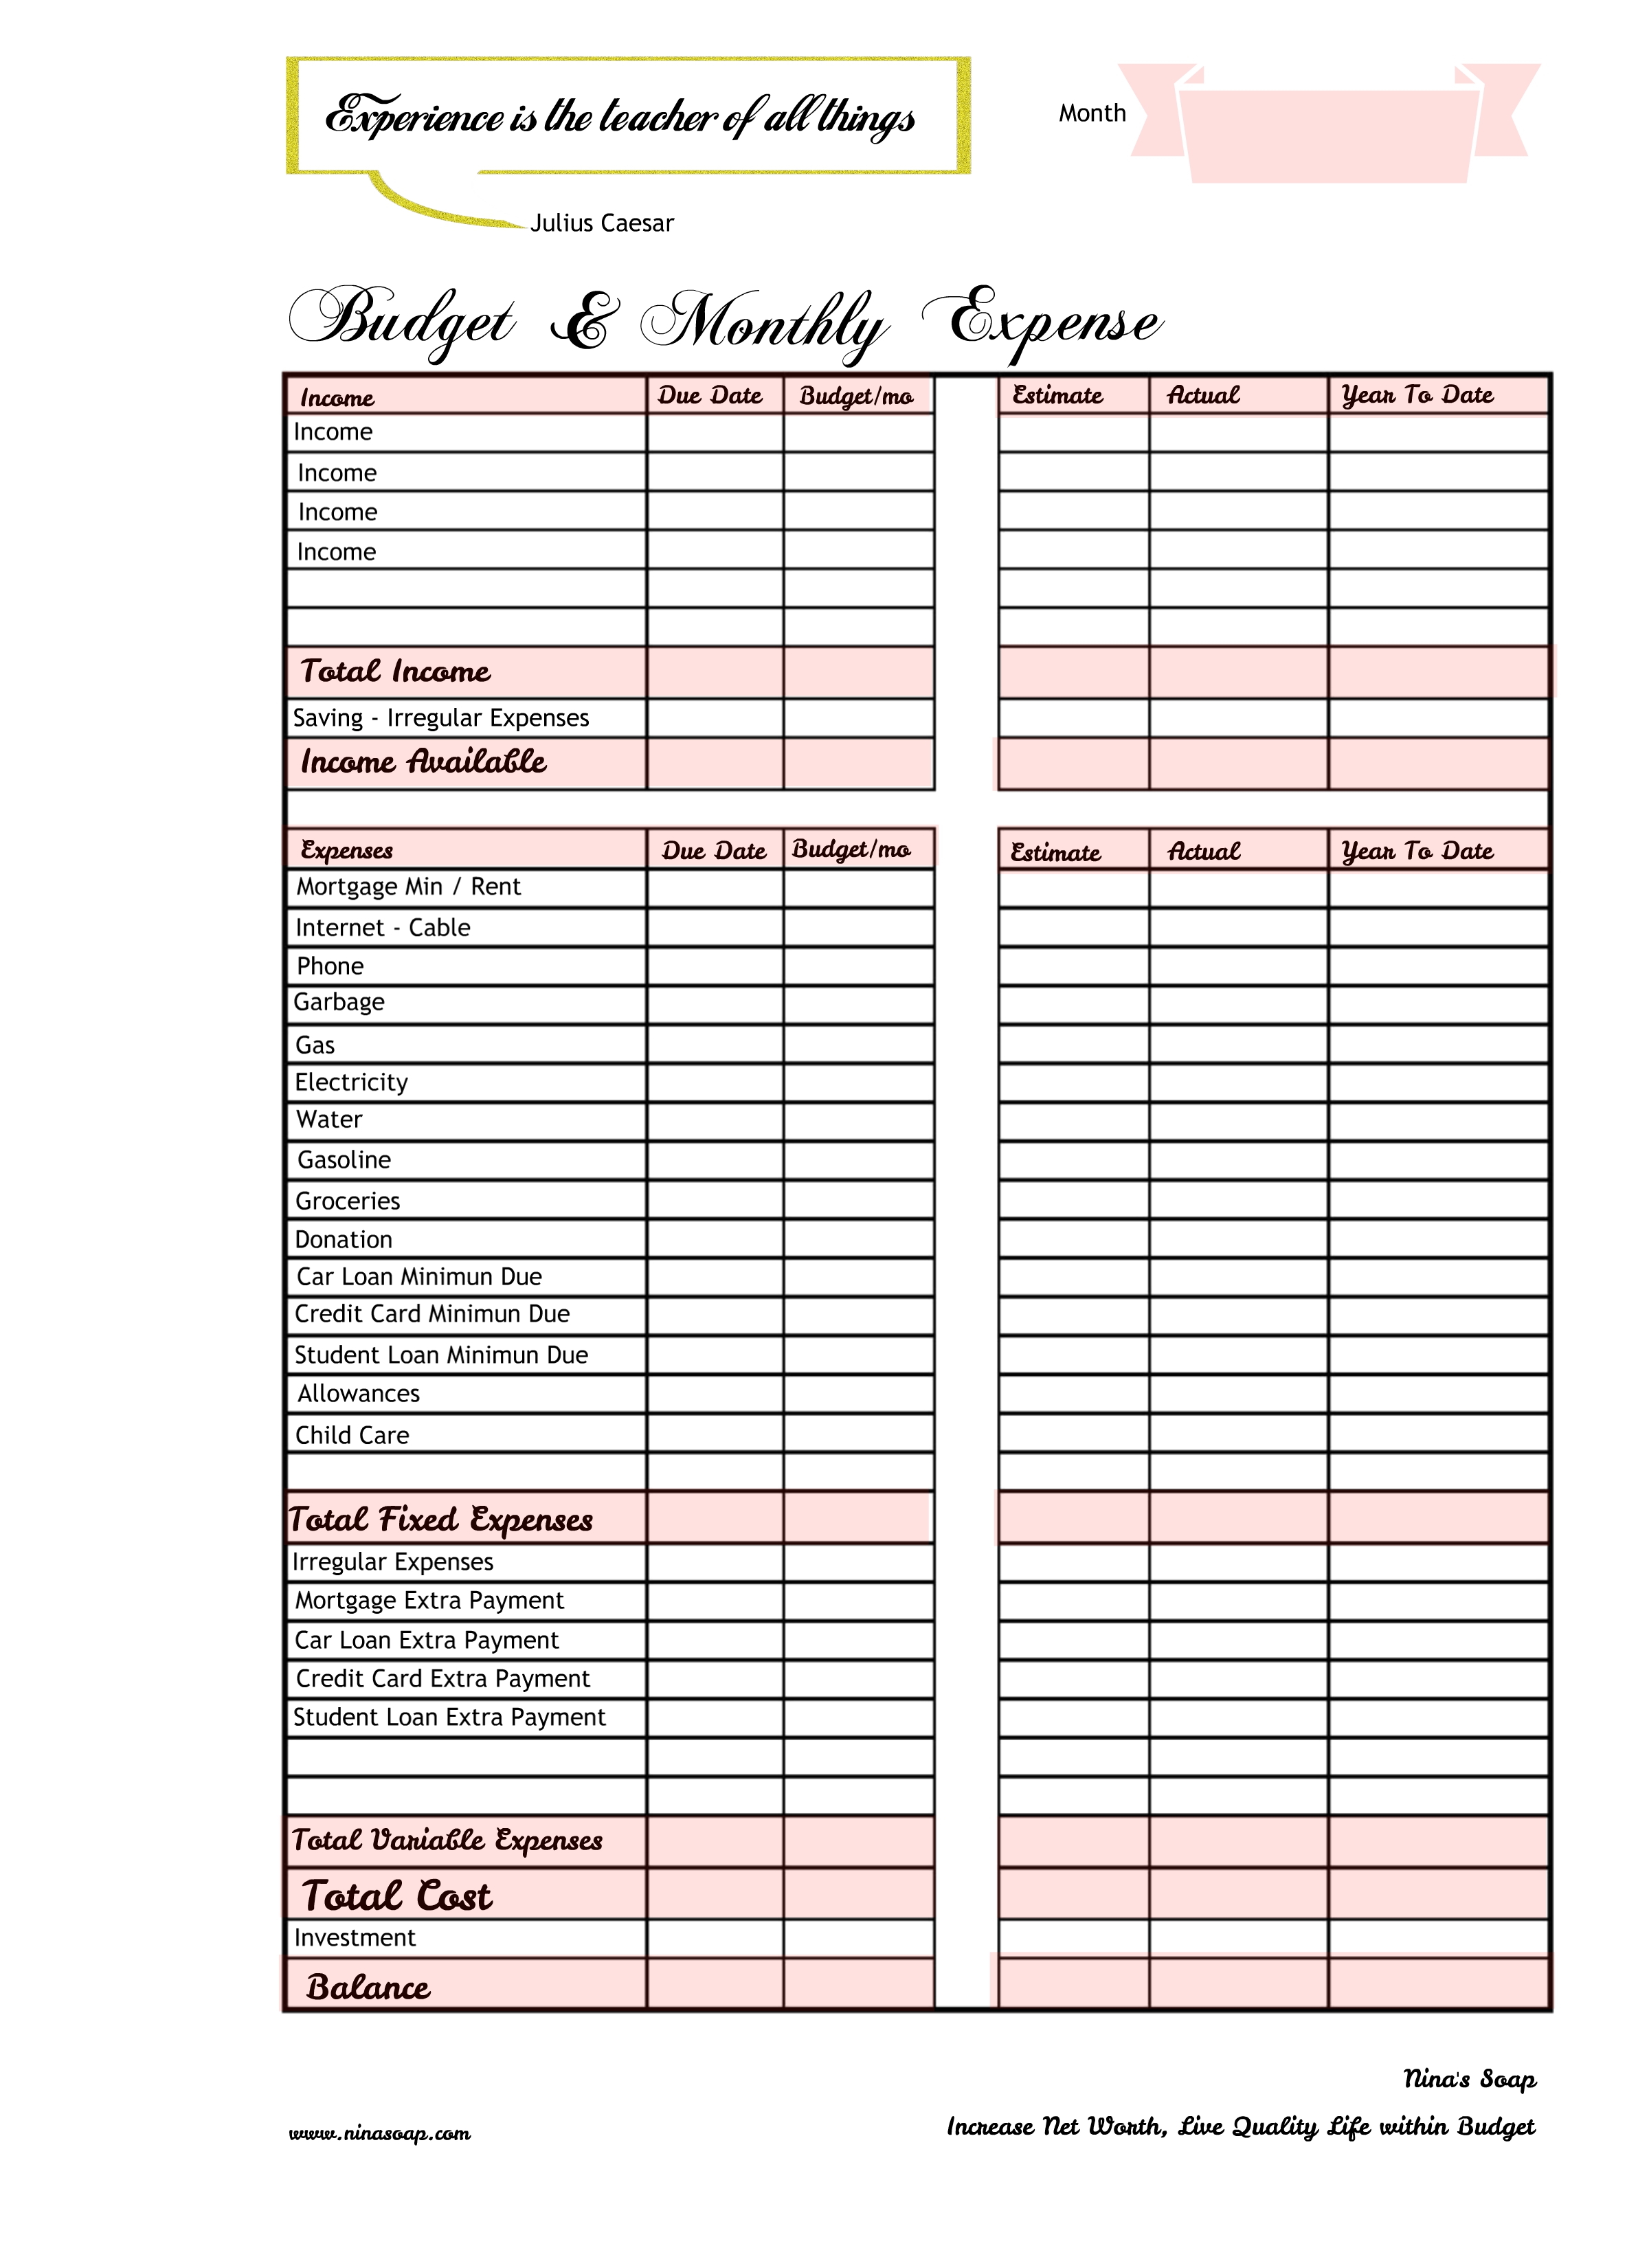 daily income and expense tracker printable